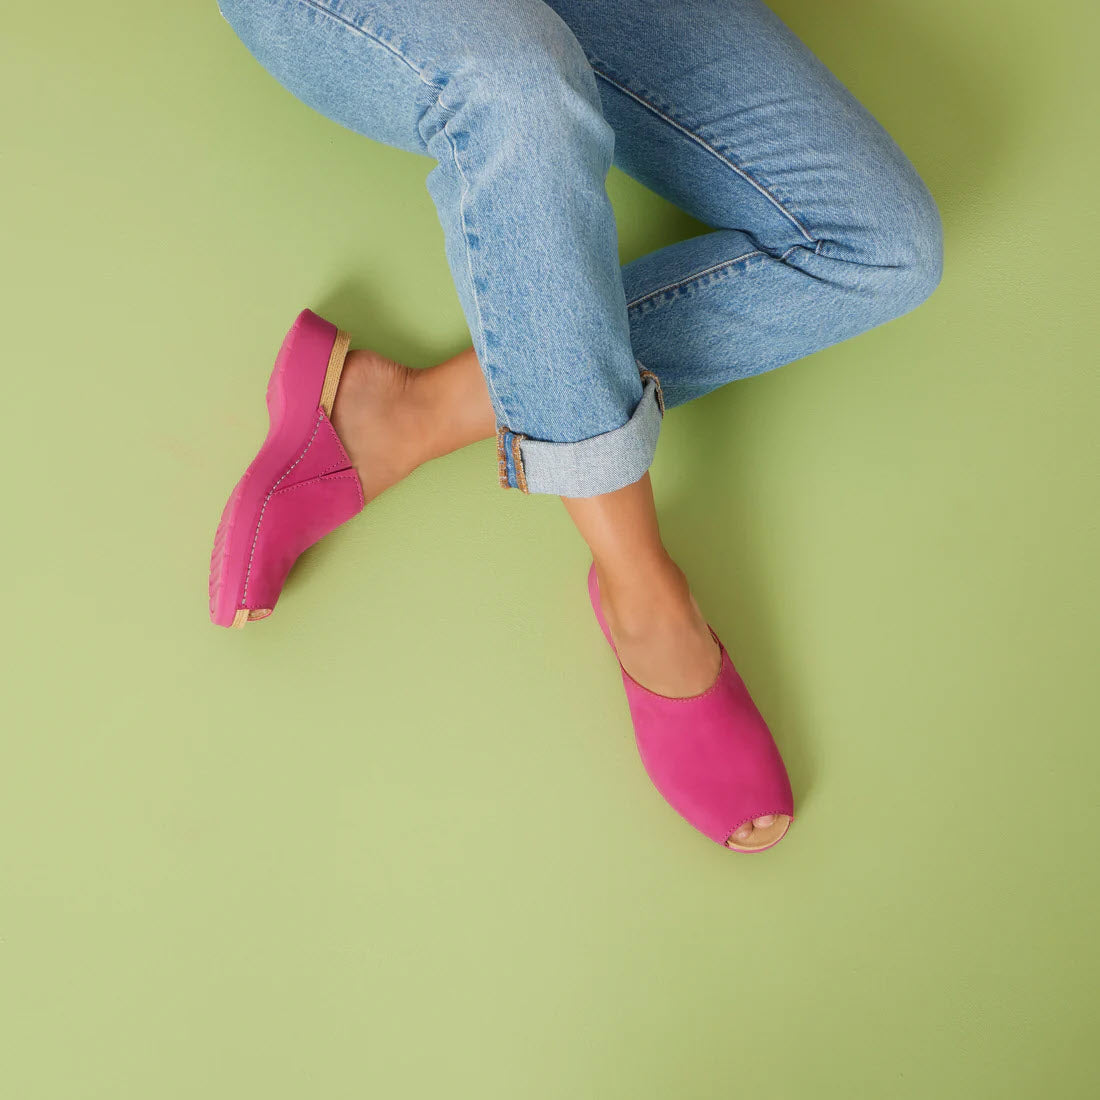 Person wearing Dansko Ravyn Fuchsia peep-toe sandals and blue jeans against a green background, with crossed legs suspended in the air.